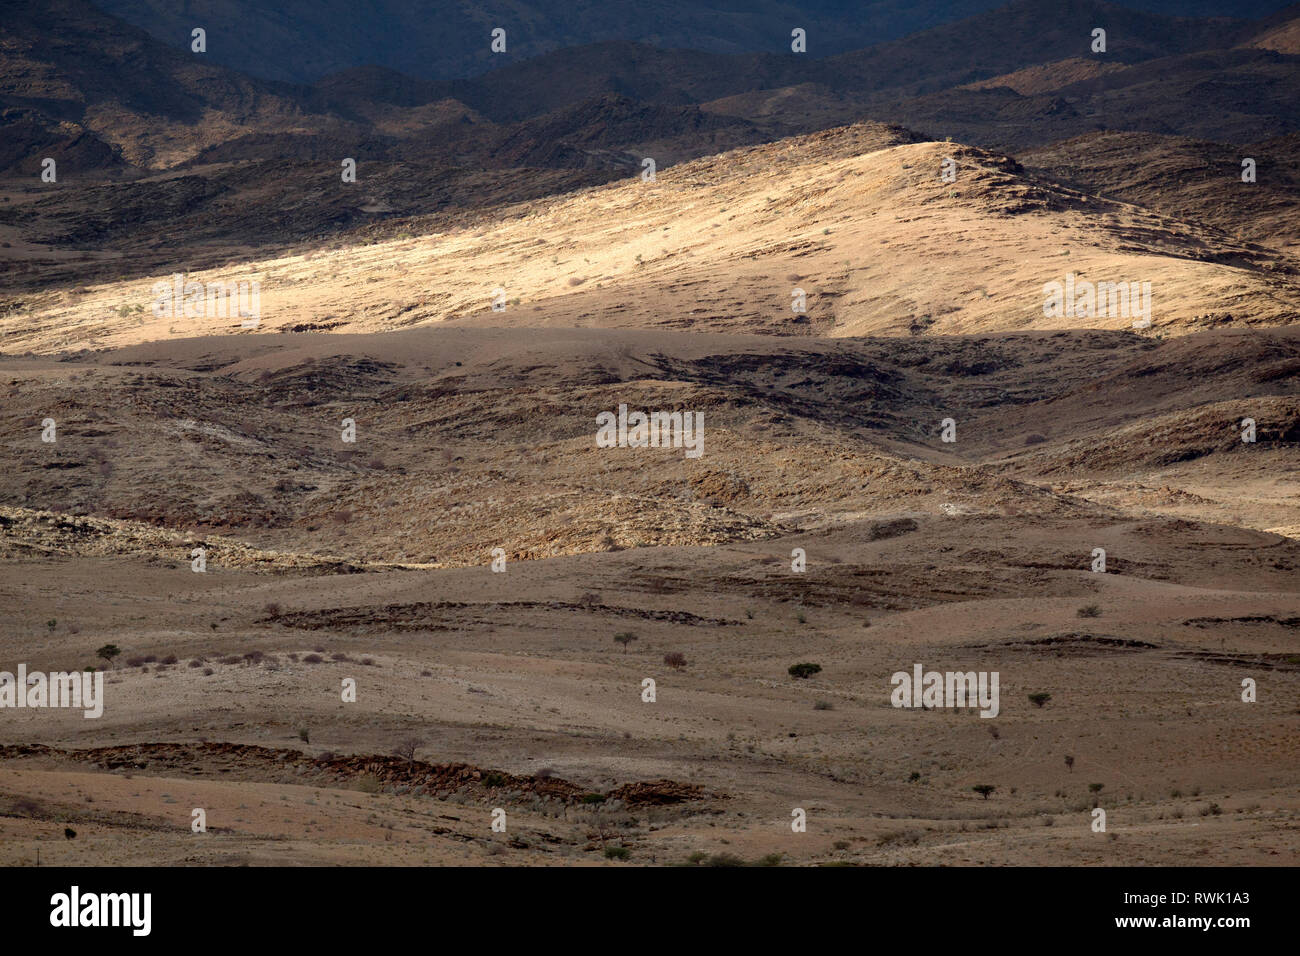 Moody landscape of the Namibi's valley of 1000 hills, Naukluft National Park, Namibia. Stock Photo